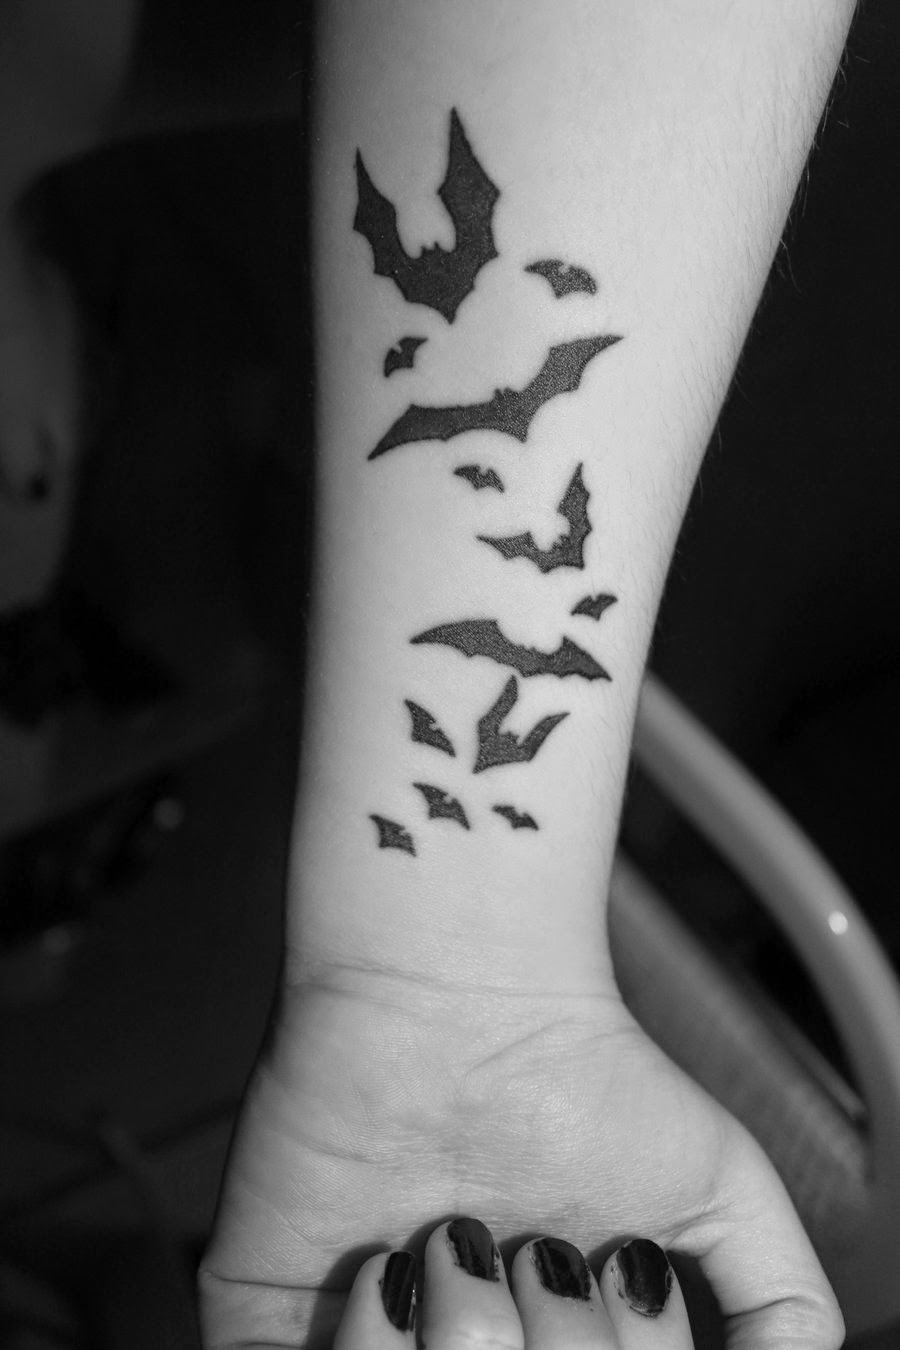 Black Flying Bats Tattoo On Forearm By Lady Lilith